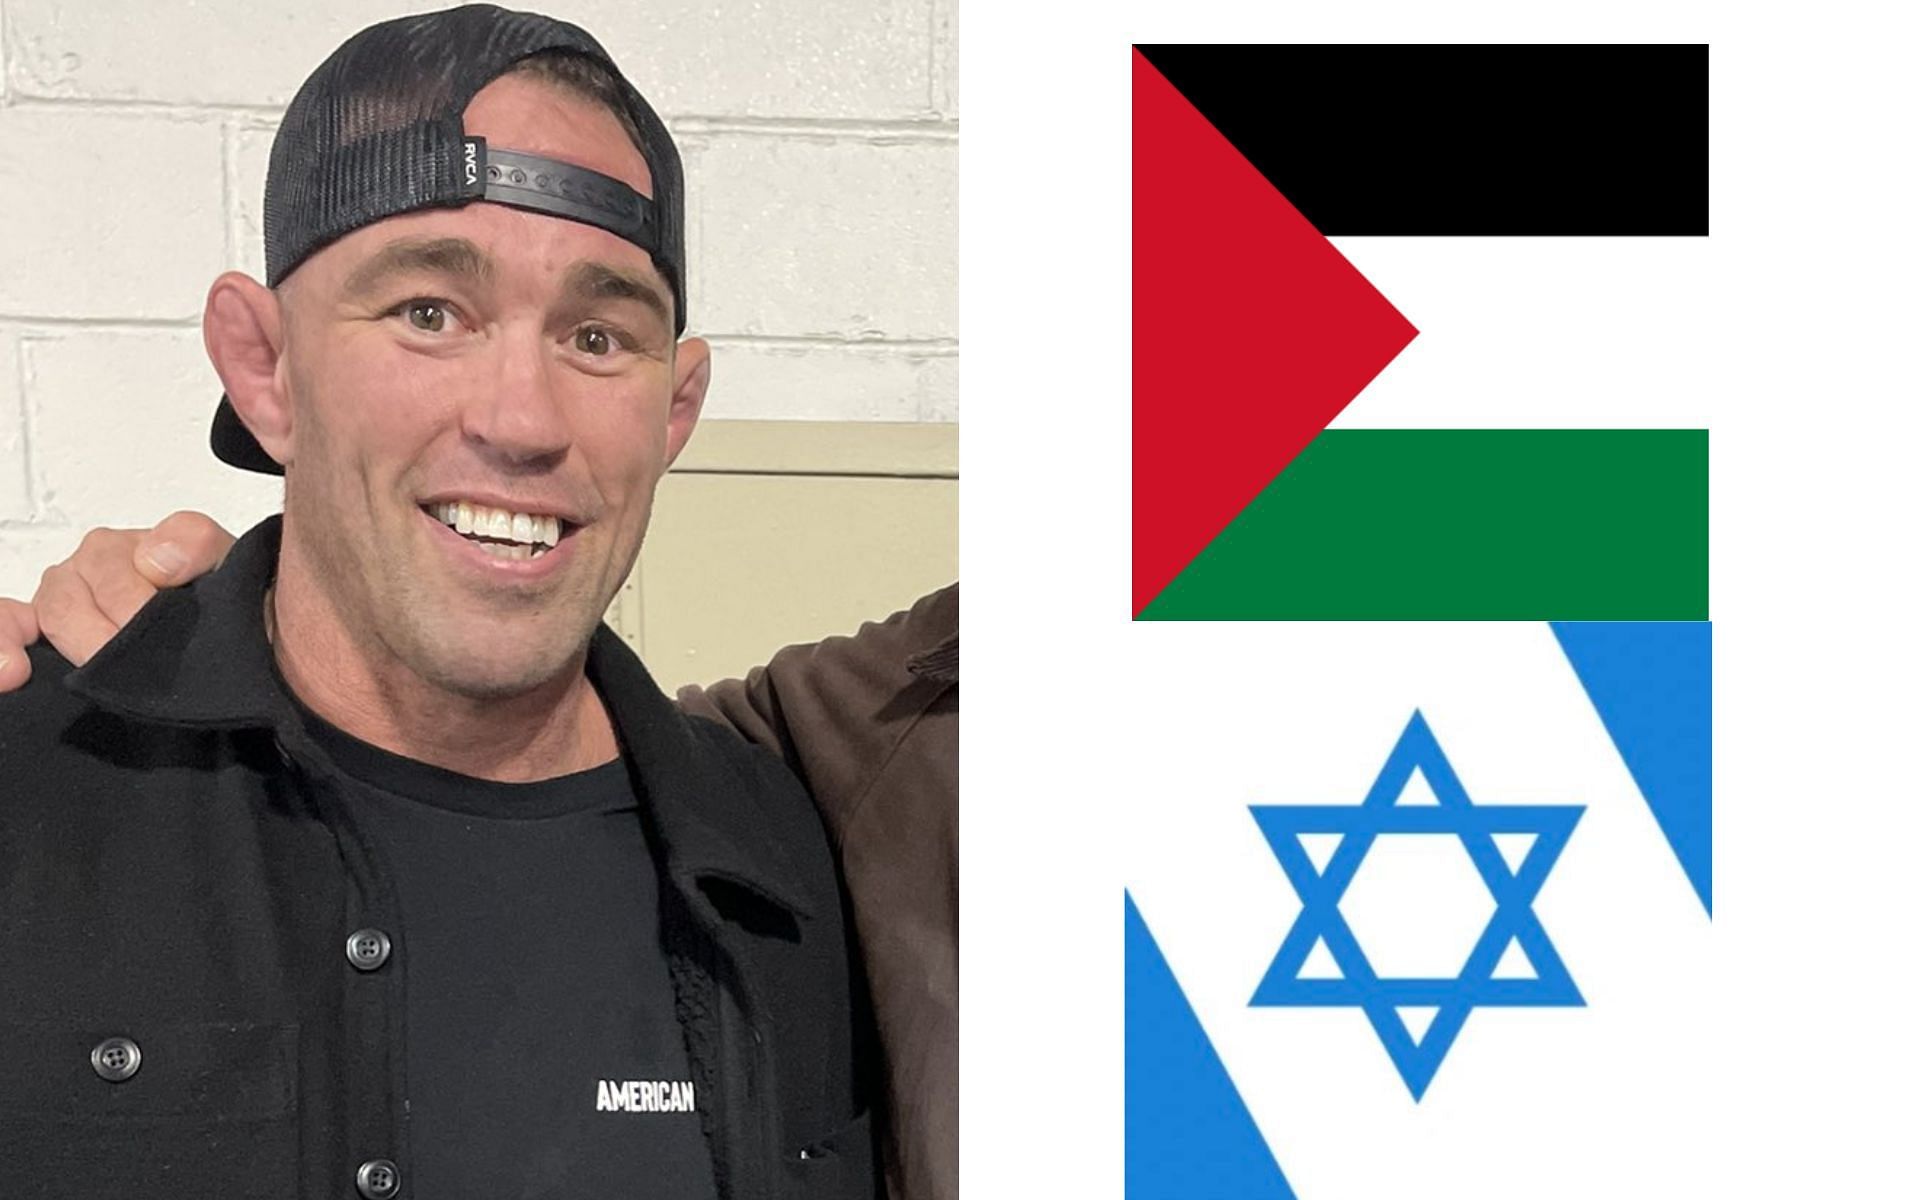 Jake Shields [Left], and Palestine and Israel flags [Right] [Photo credit: @jakeshieldsajj, @palestine, and @Israel - X]